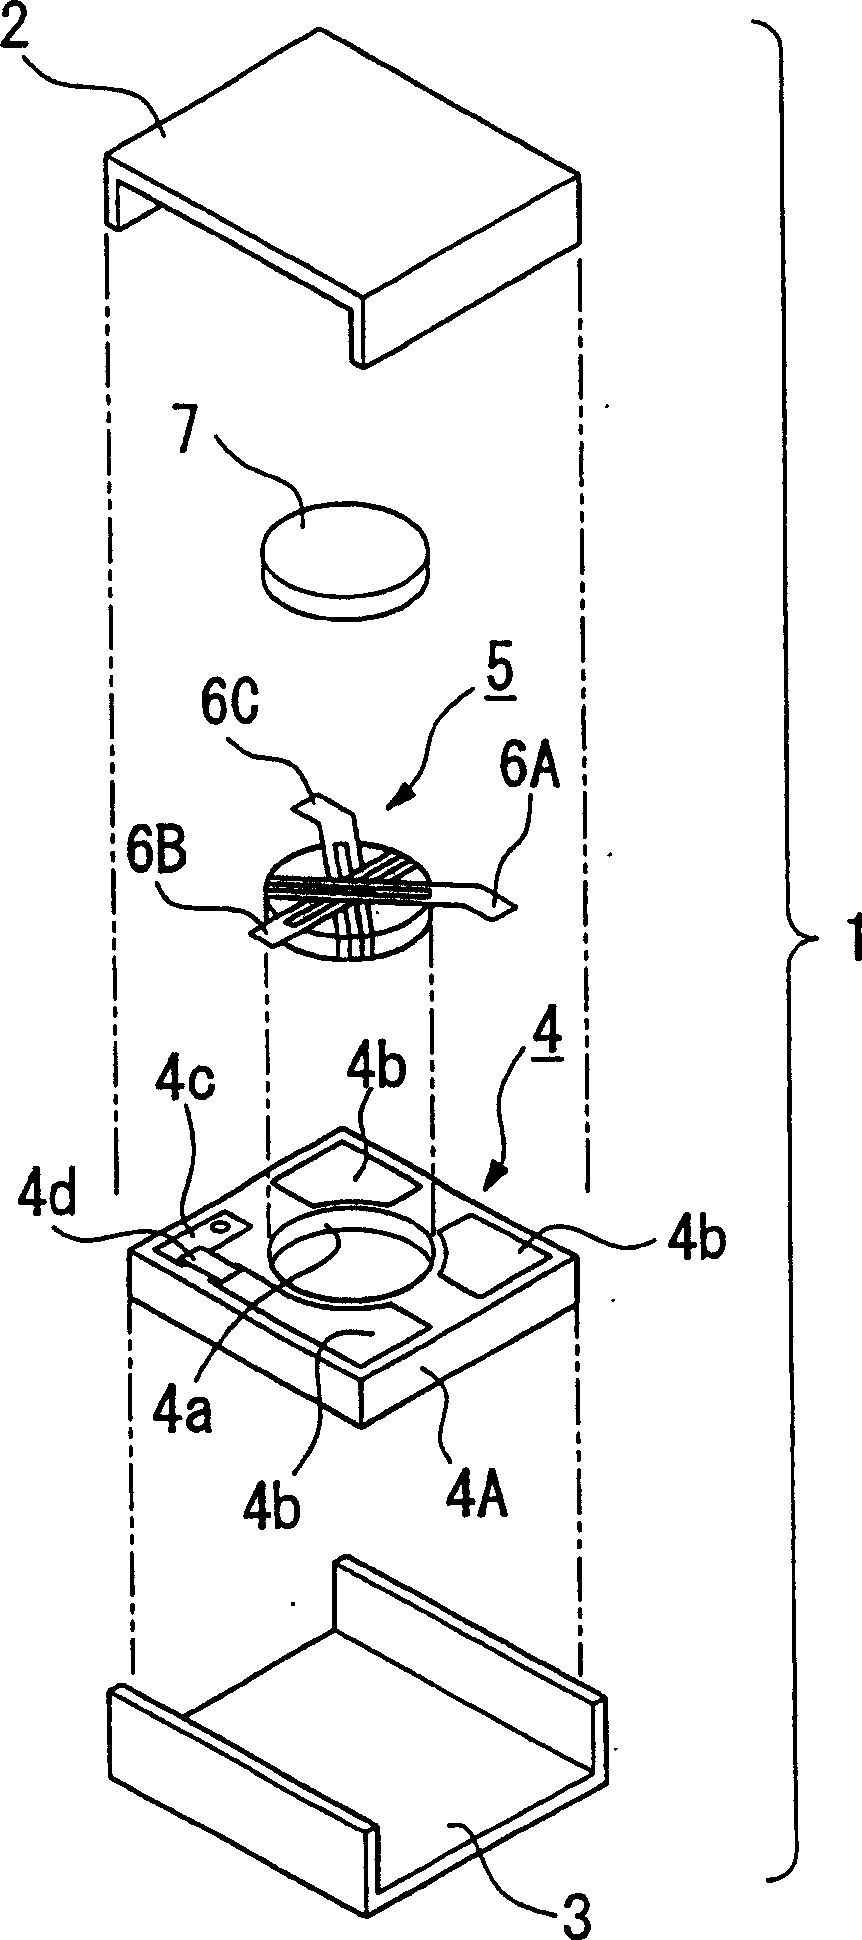 Garnet ferrite and a non-reciprocal circuit element applying the same